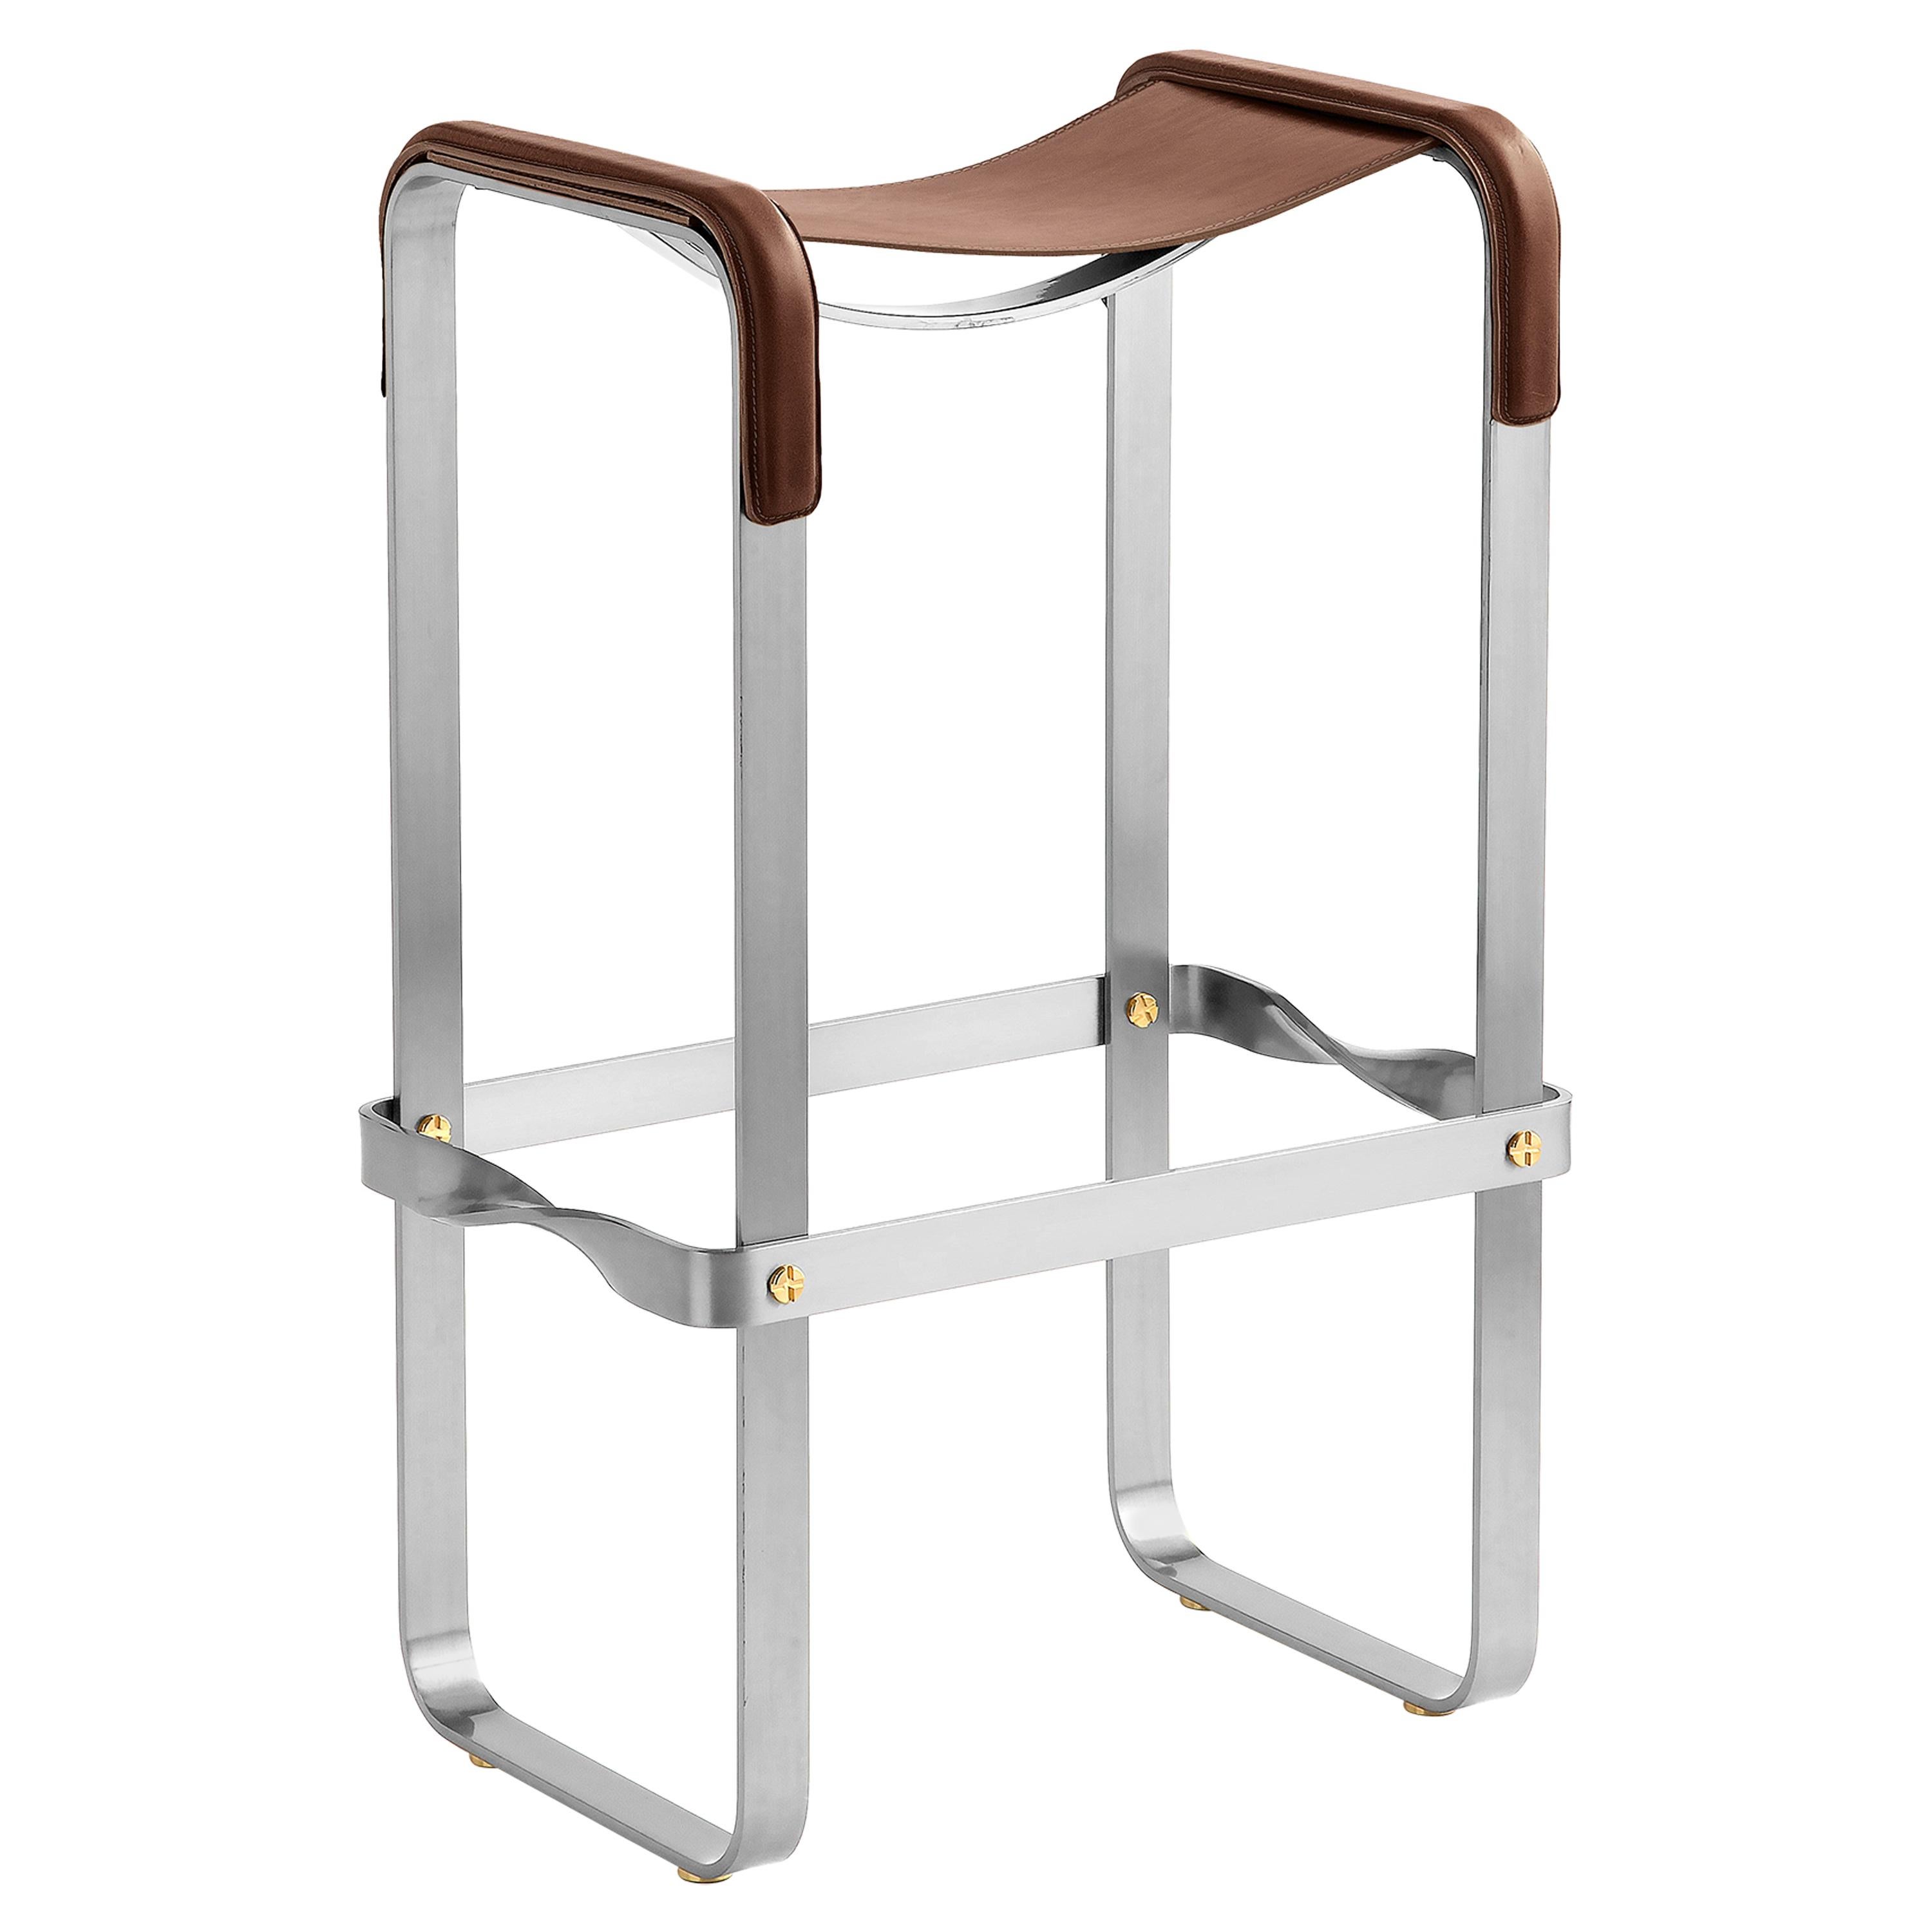 Elegant Classic Contemporary Bar Stool Silver Aged Metal & Dark Brown Leather